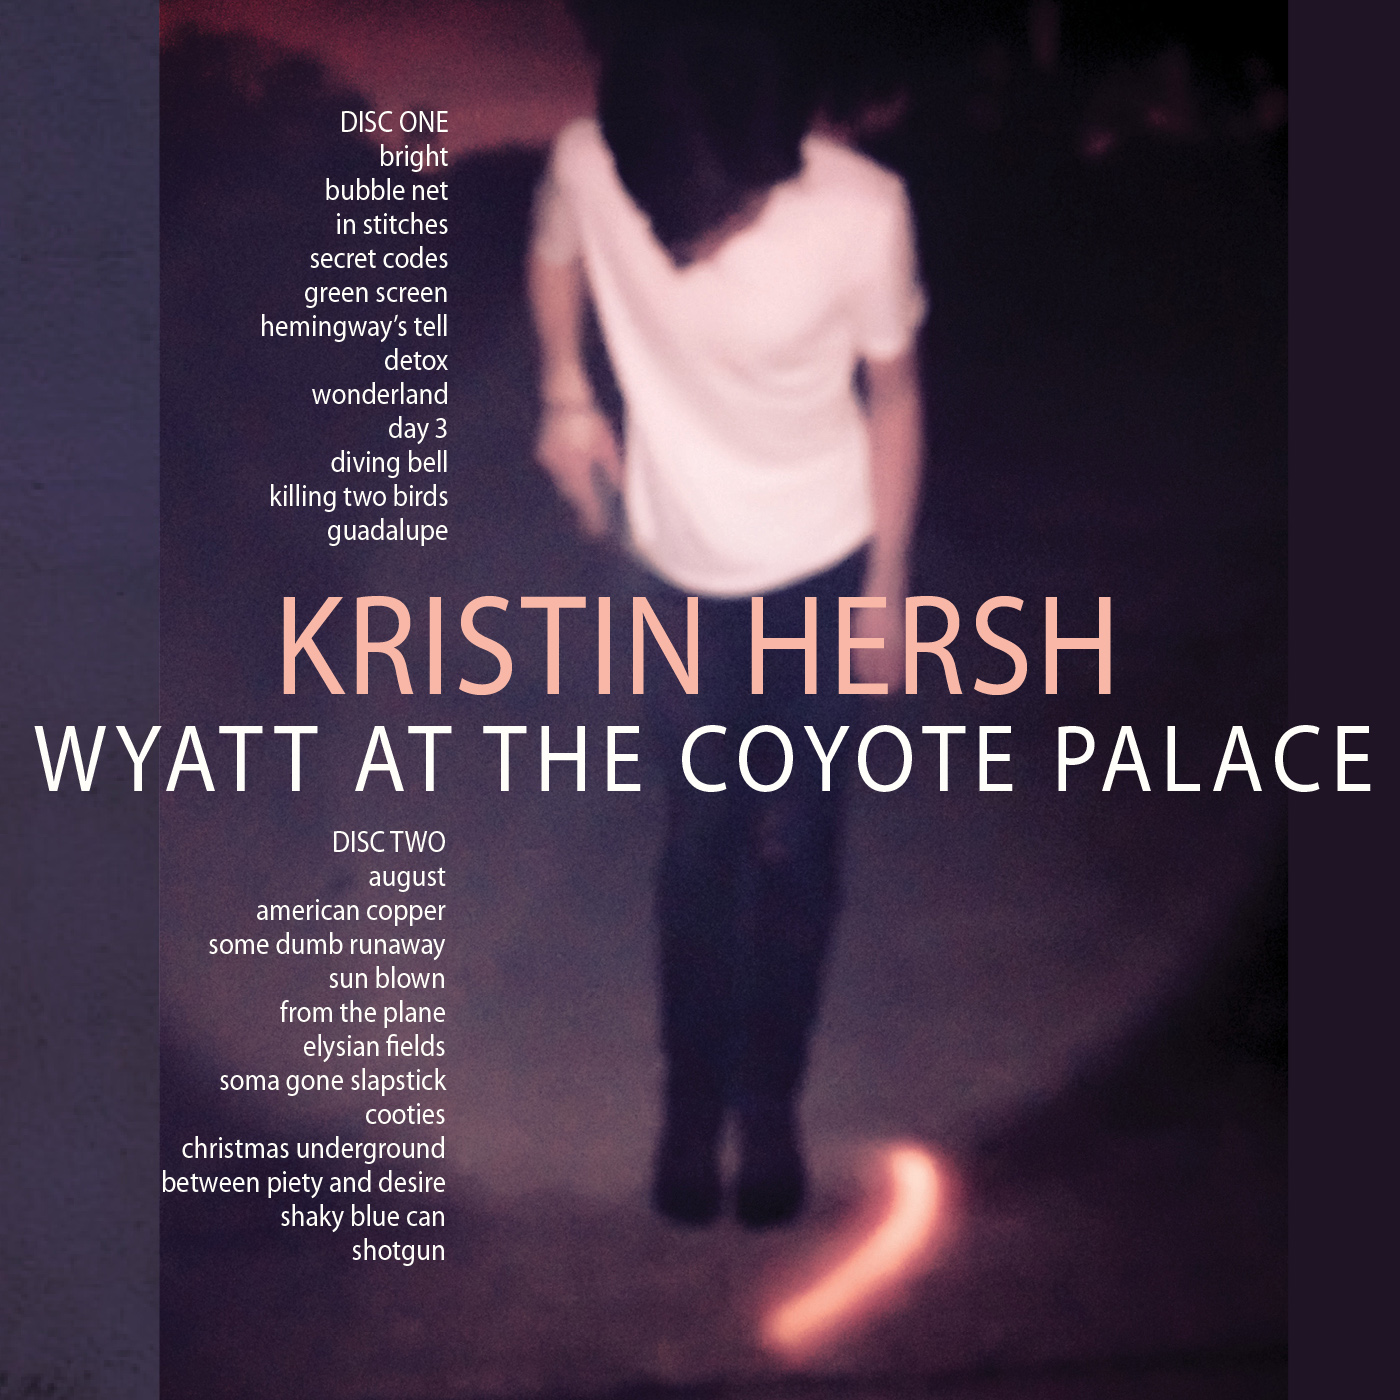 kristin-hersh-wyatt-at-the-coyote-palace-cd-cover